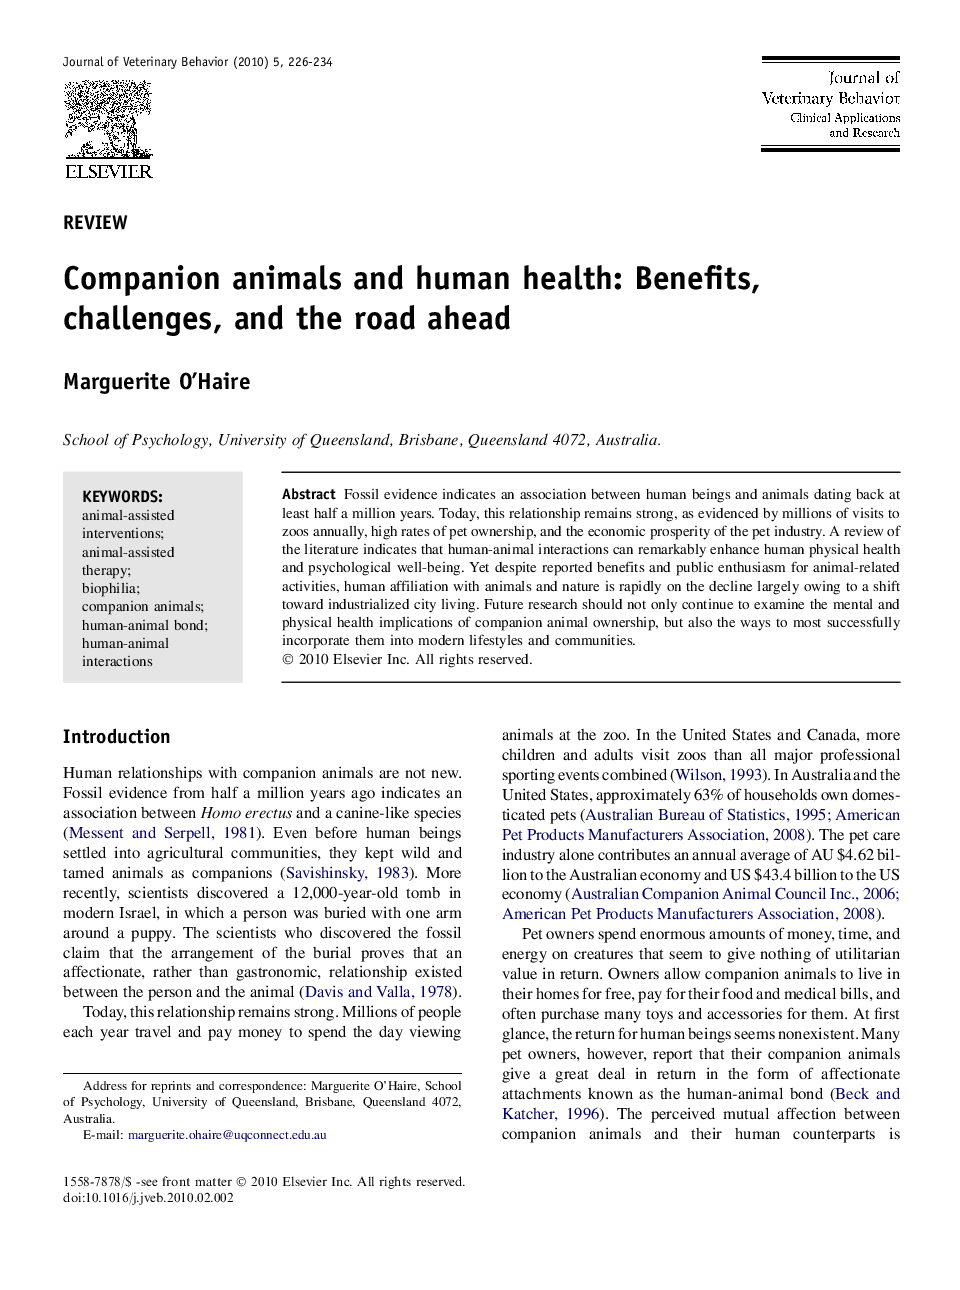 Companion animals and human health: Benefits, challenges, and the road ahead